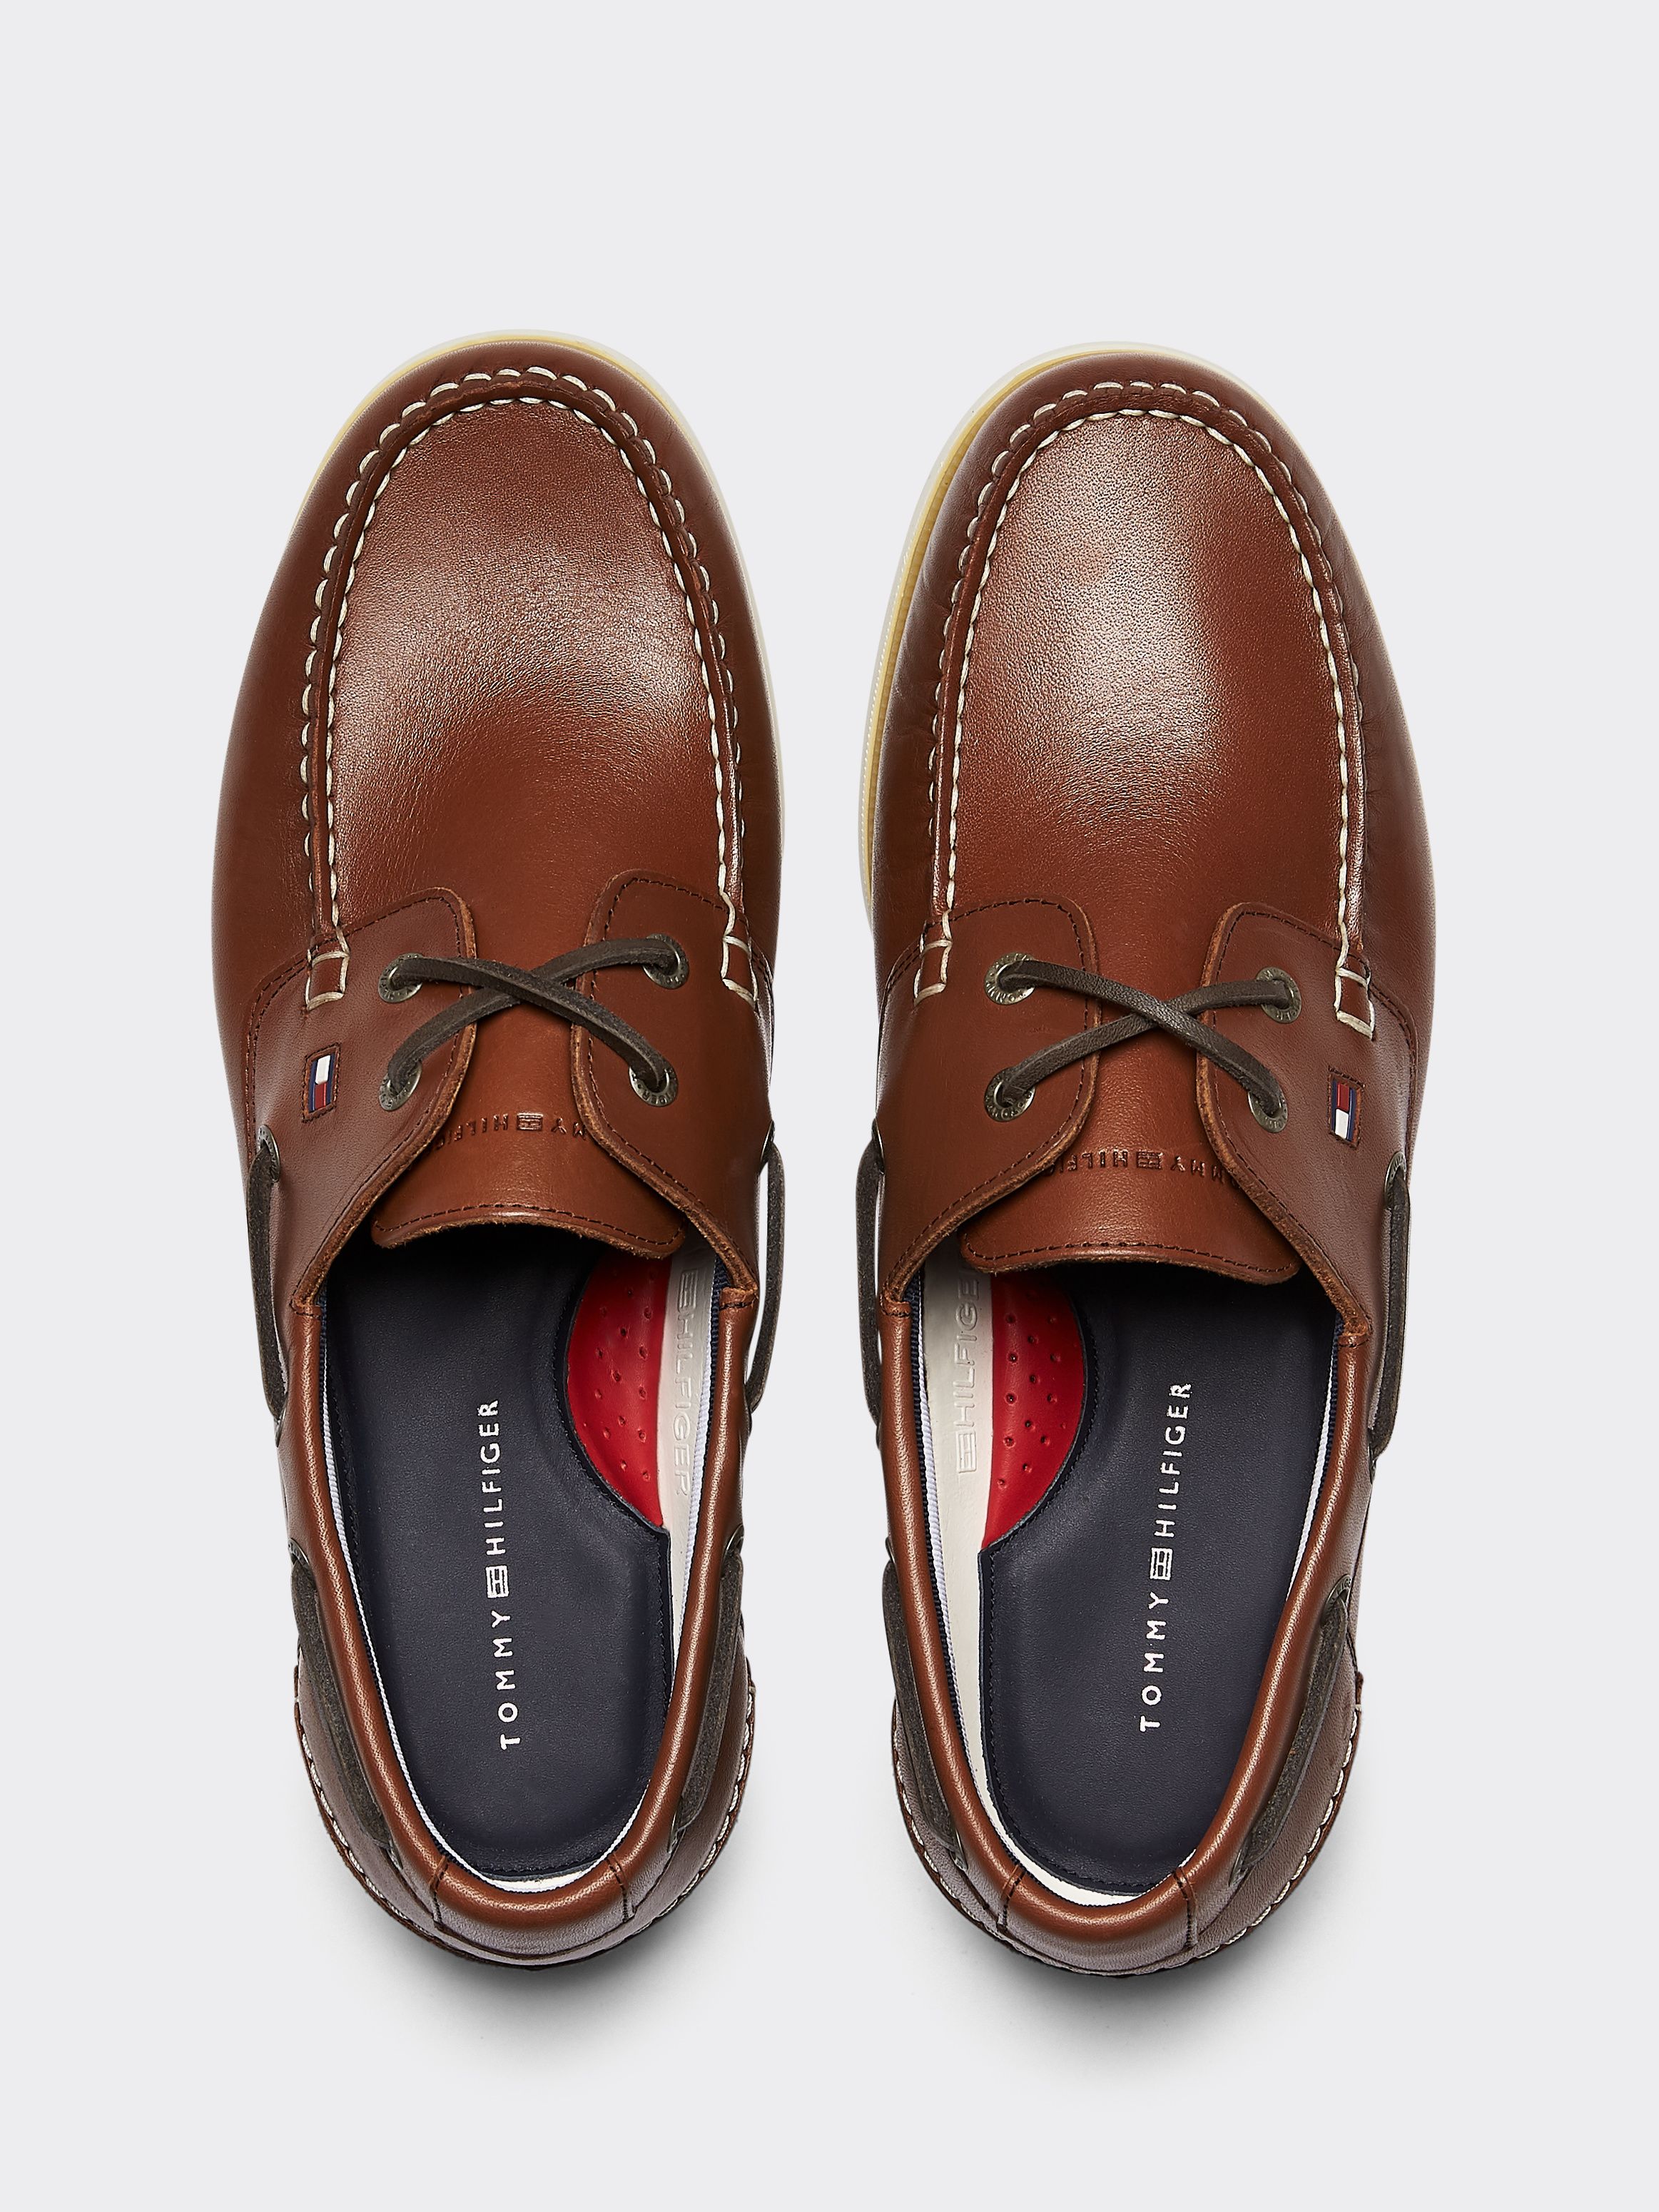 tommy hilfiger leather boat shoes